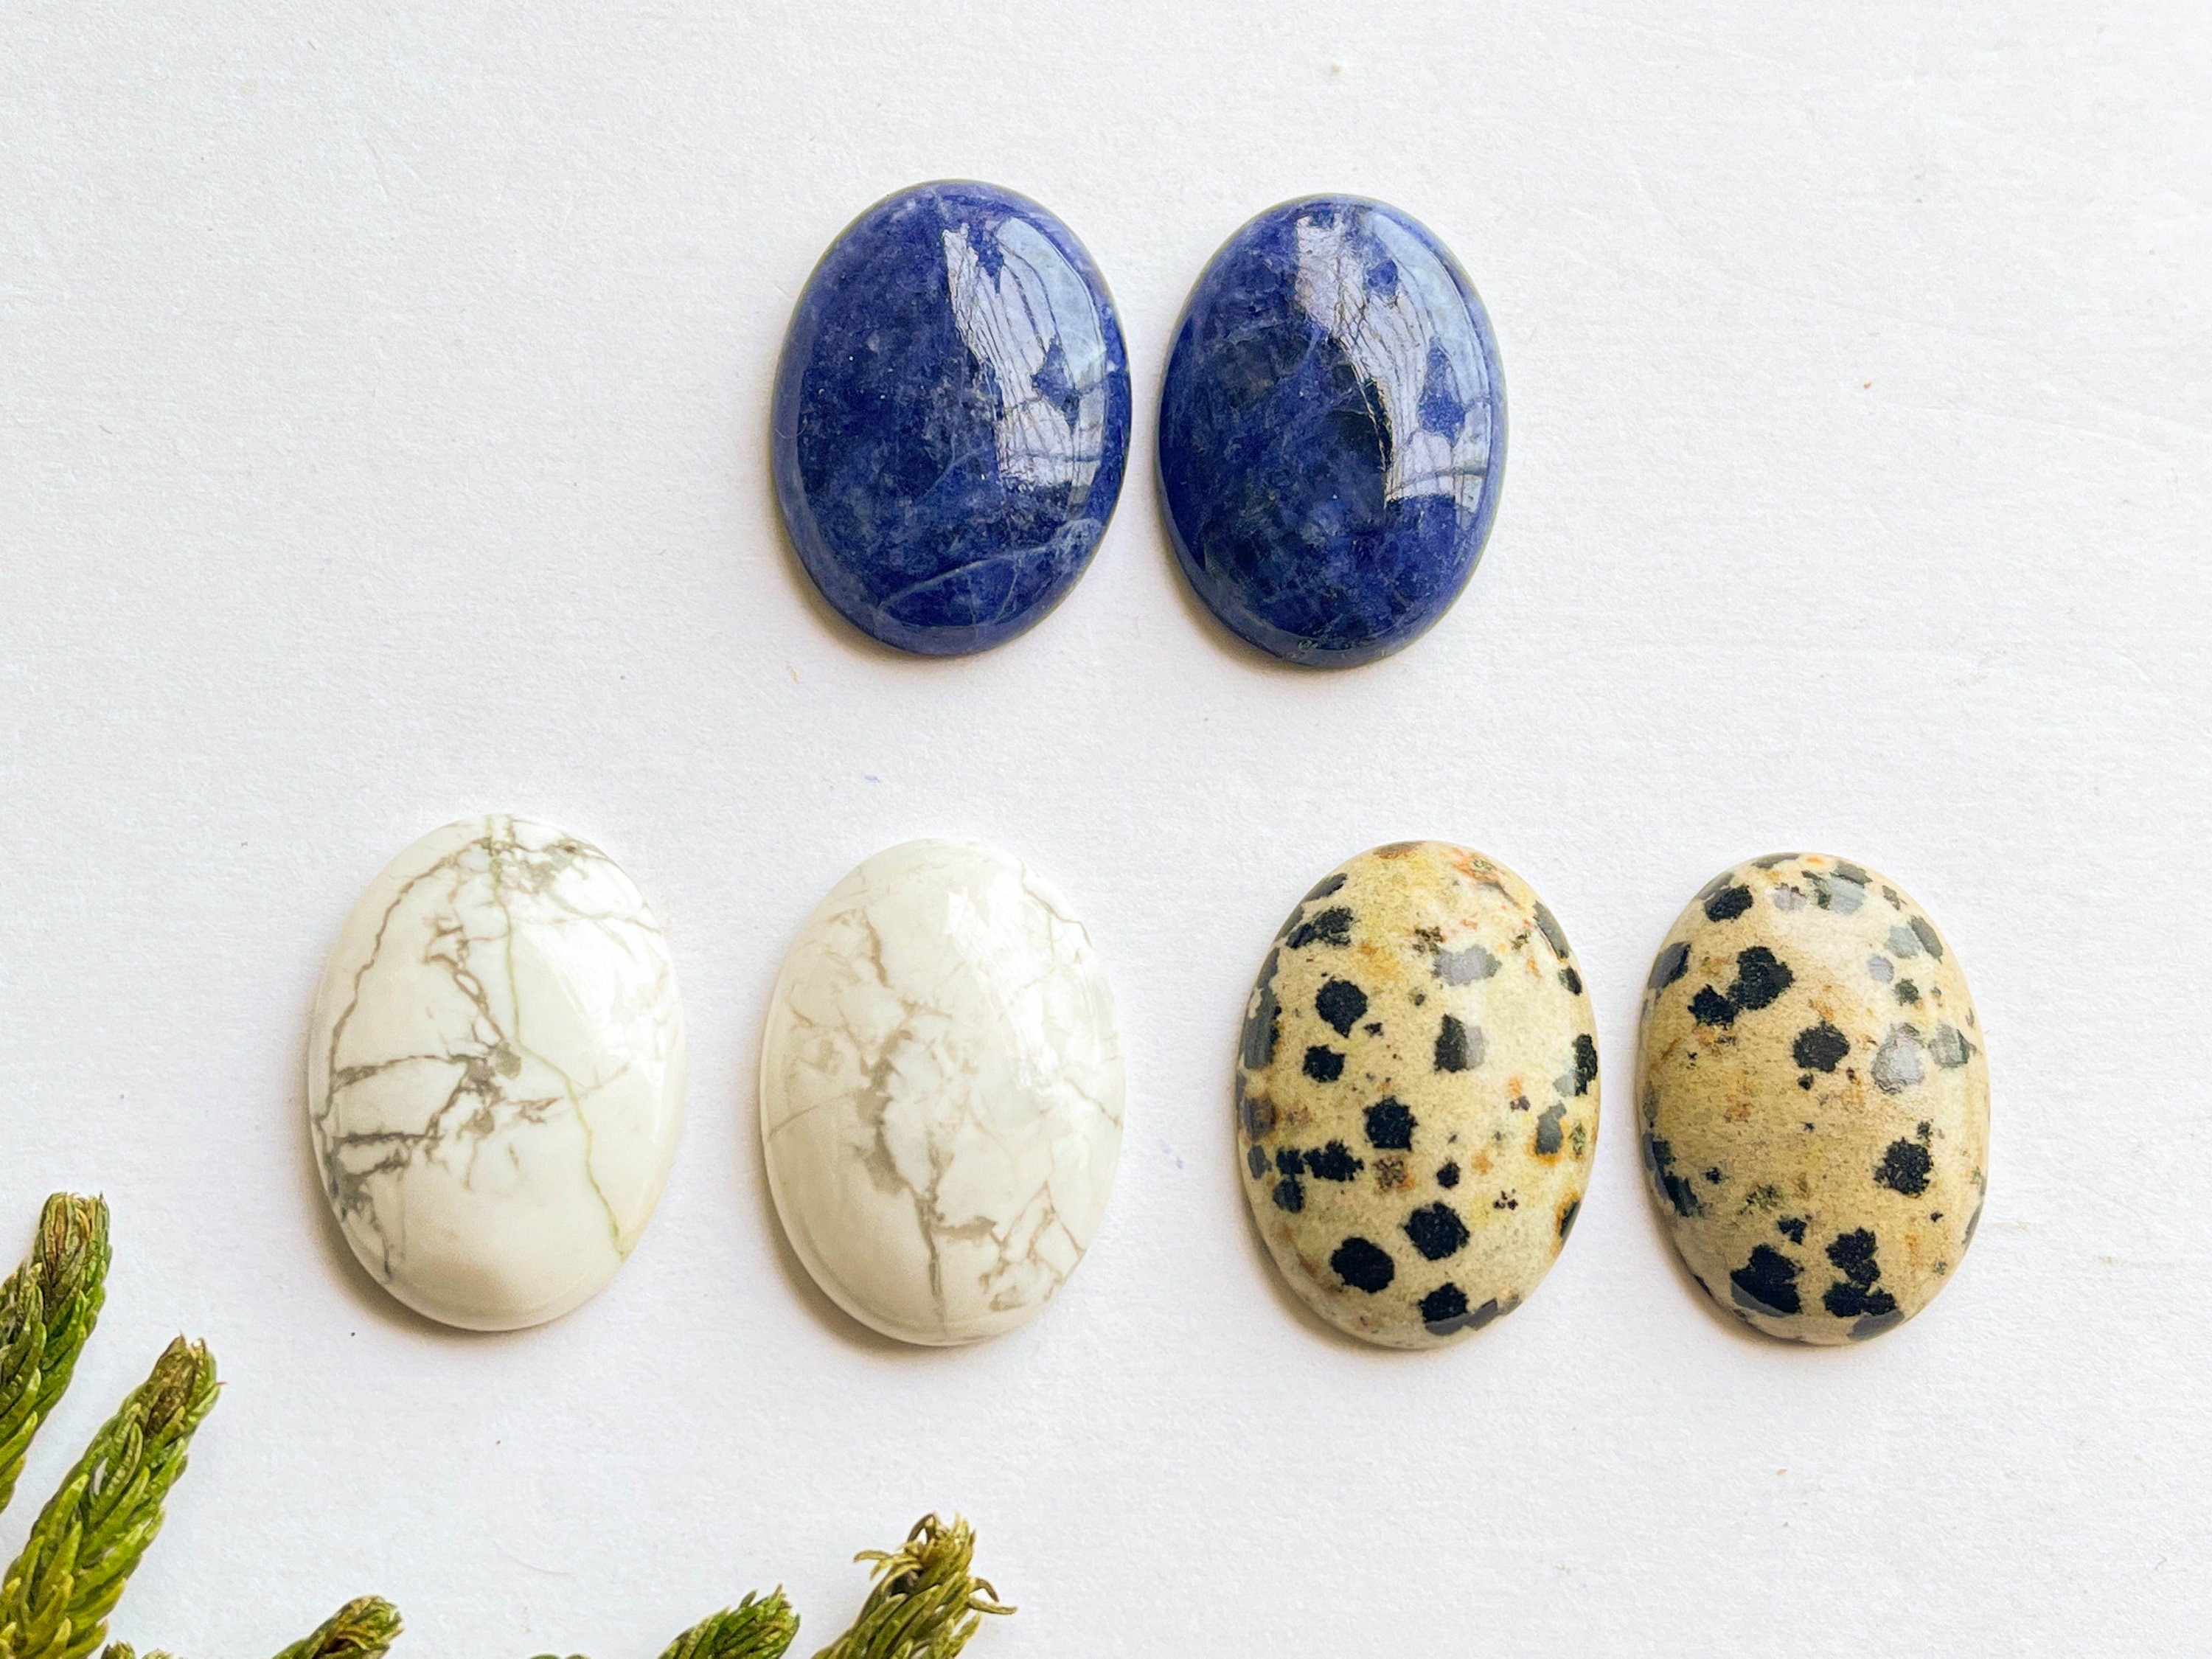 3 Pairs Lot Natural Gemstone Cabochons, Sodalite Oval Cabochon, Howlite Oval Cabochon, Dalmatian Jasper Oval Cabochon, 18x26mm Beadsforyourjewelry